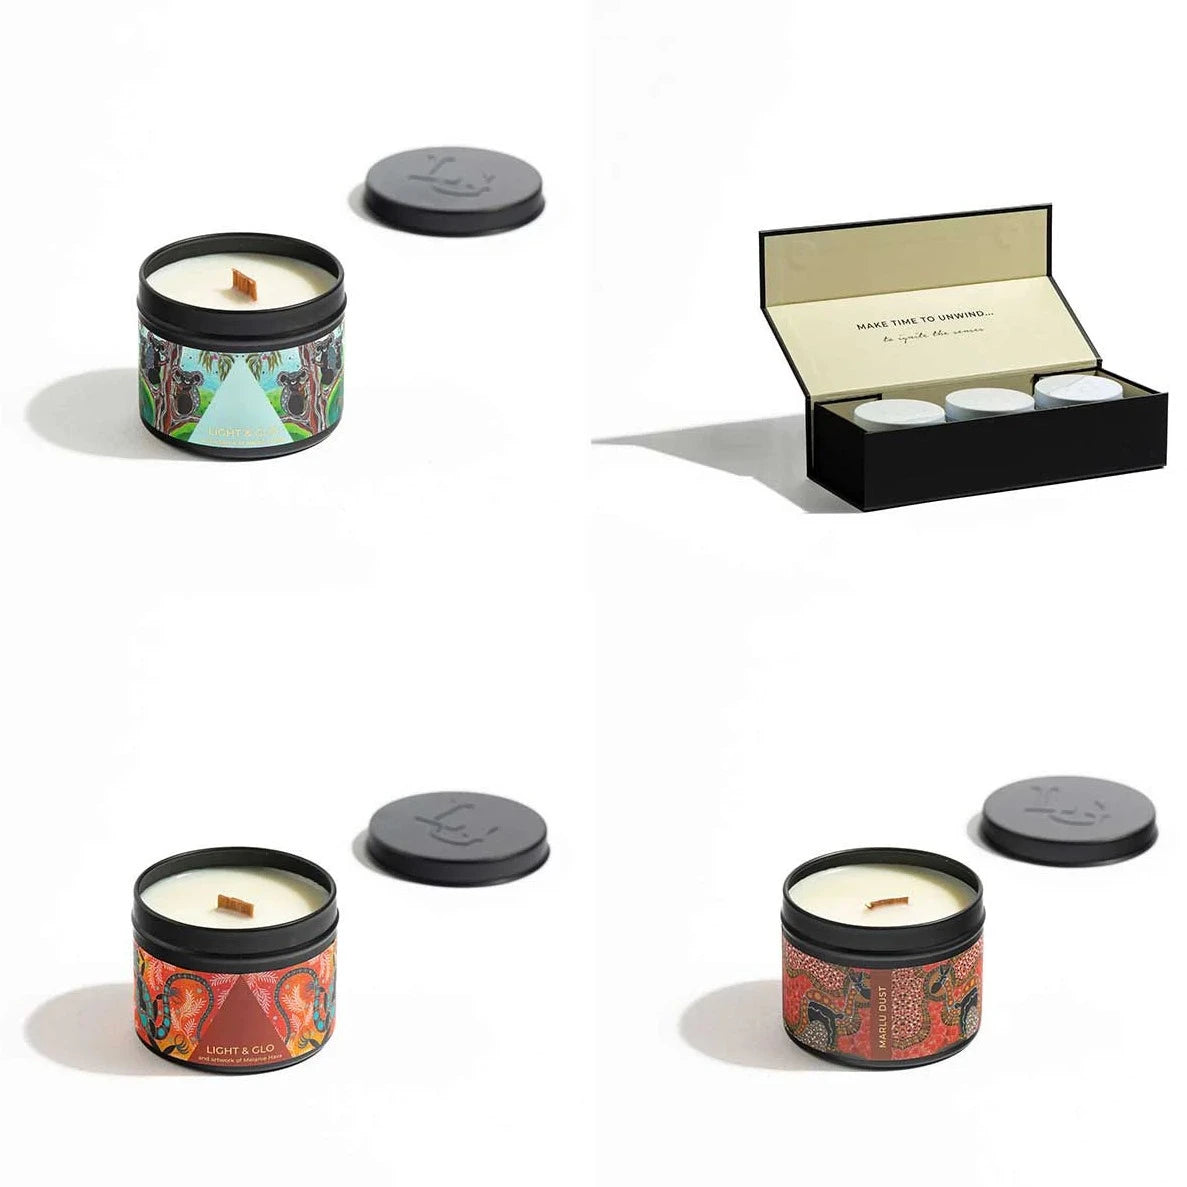 Candle trio out of gift box with their lids off.